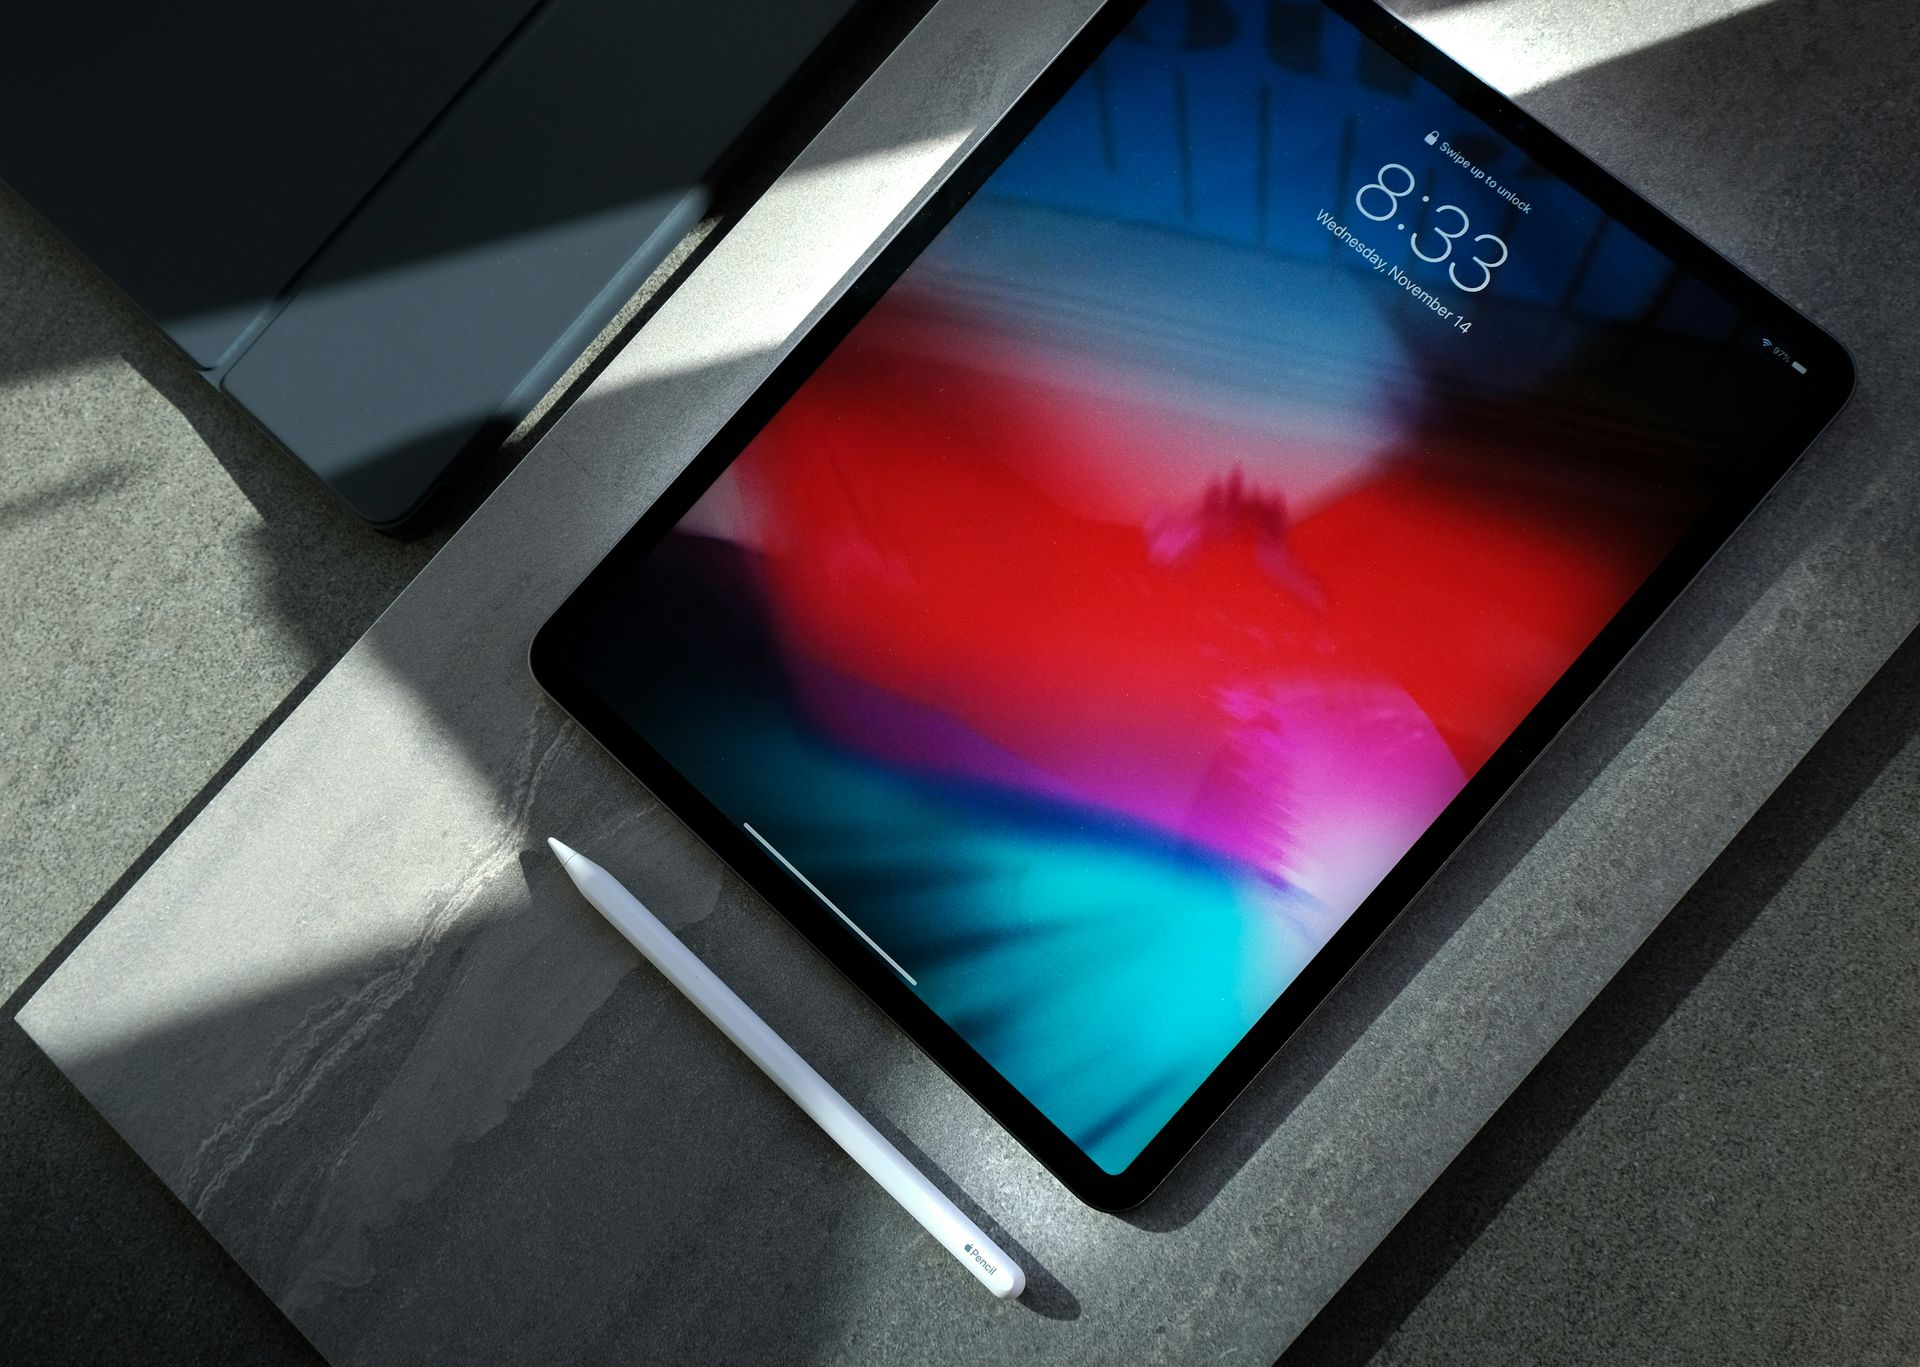 Apple's new iPad models could be hiding around the corner